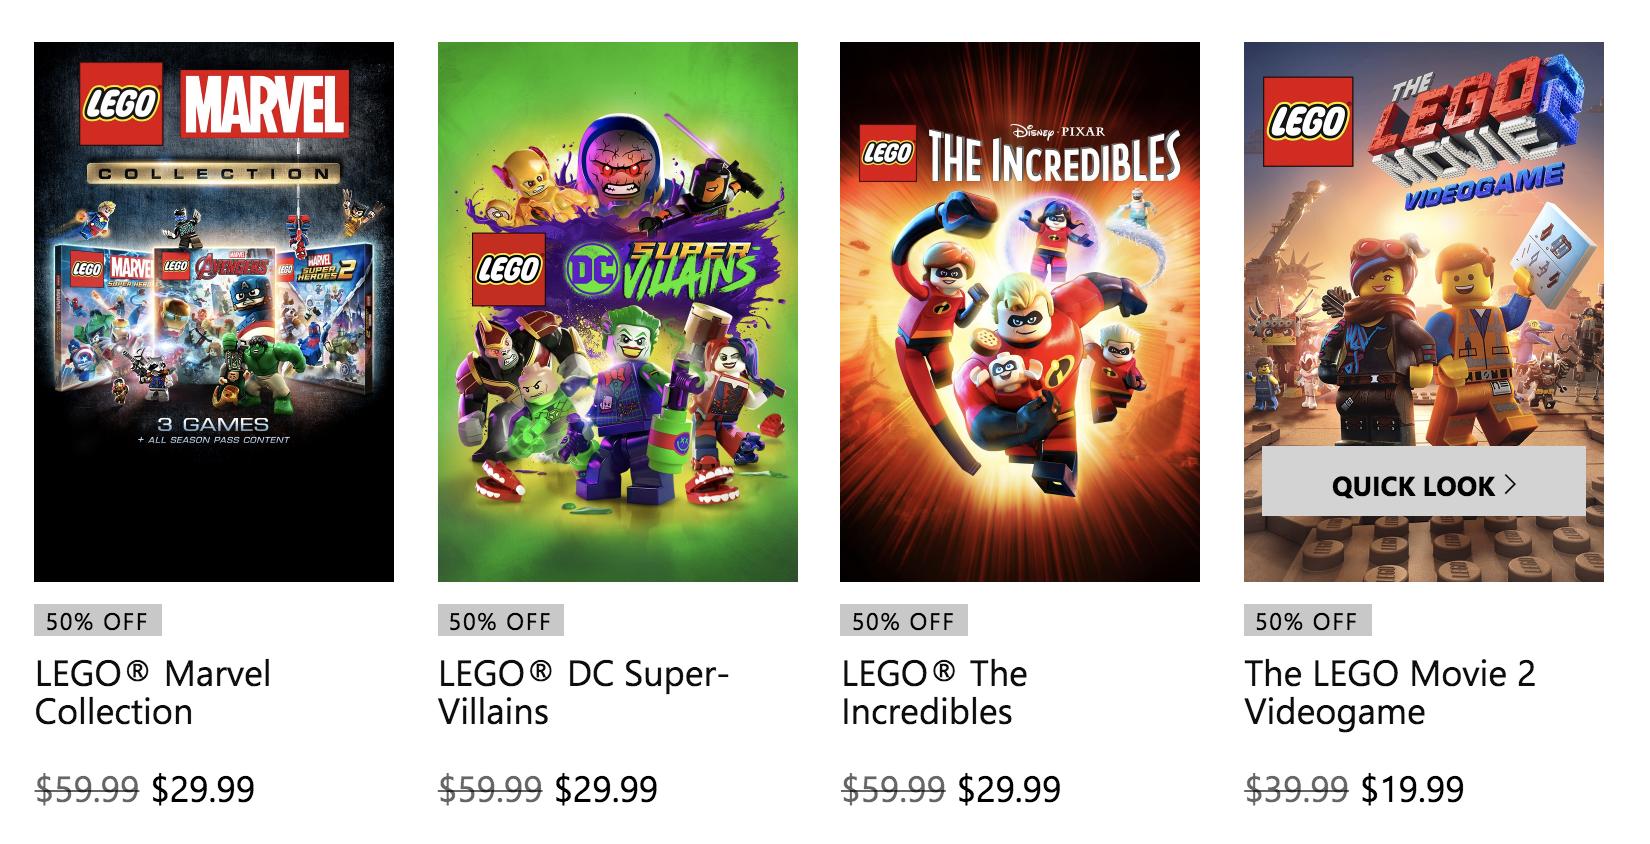 Himmel Alaska Prelude Warner Bros. Games on Twitter: ".@Xbox is having a MASSIVE LEGO sale right  now! Save up to 70% off of tons of our best LEGO games like #LEGODCGame and  #LEGOMarvelGame. Hurry before